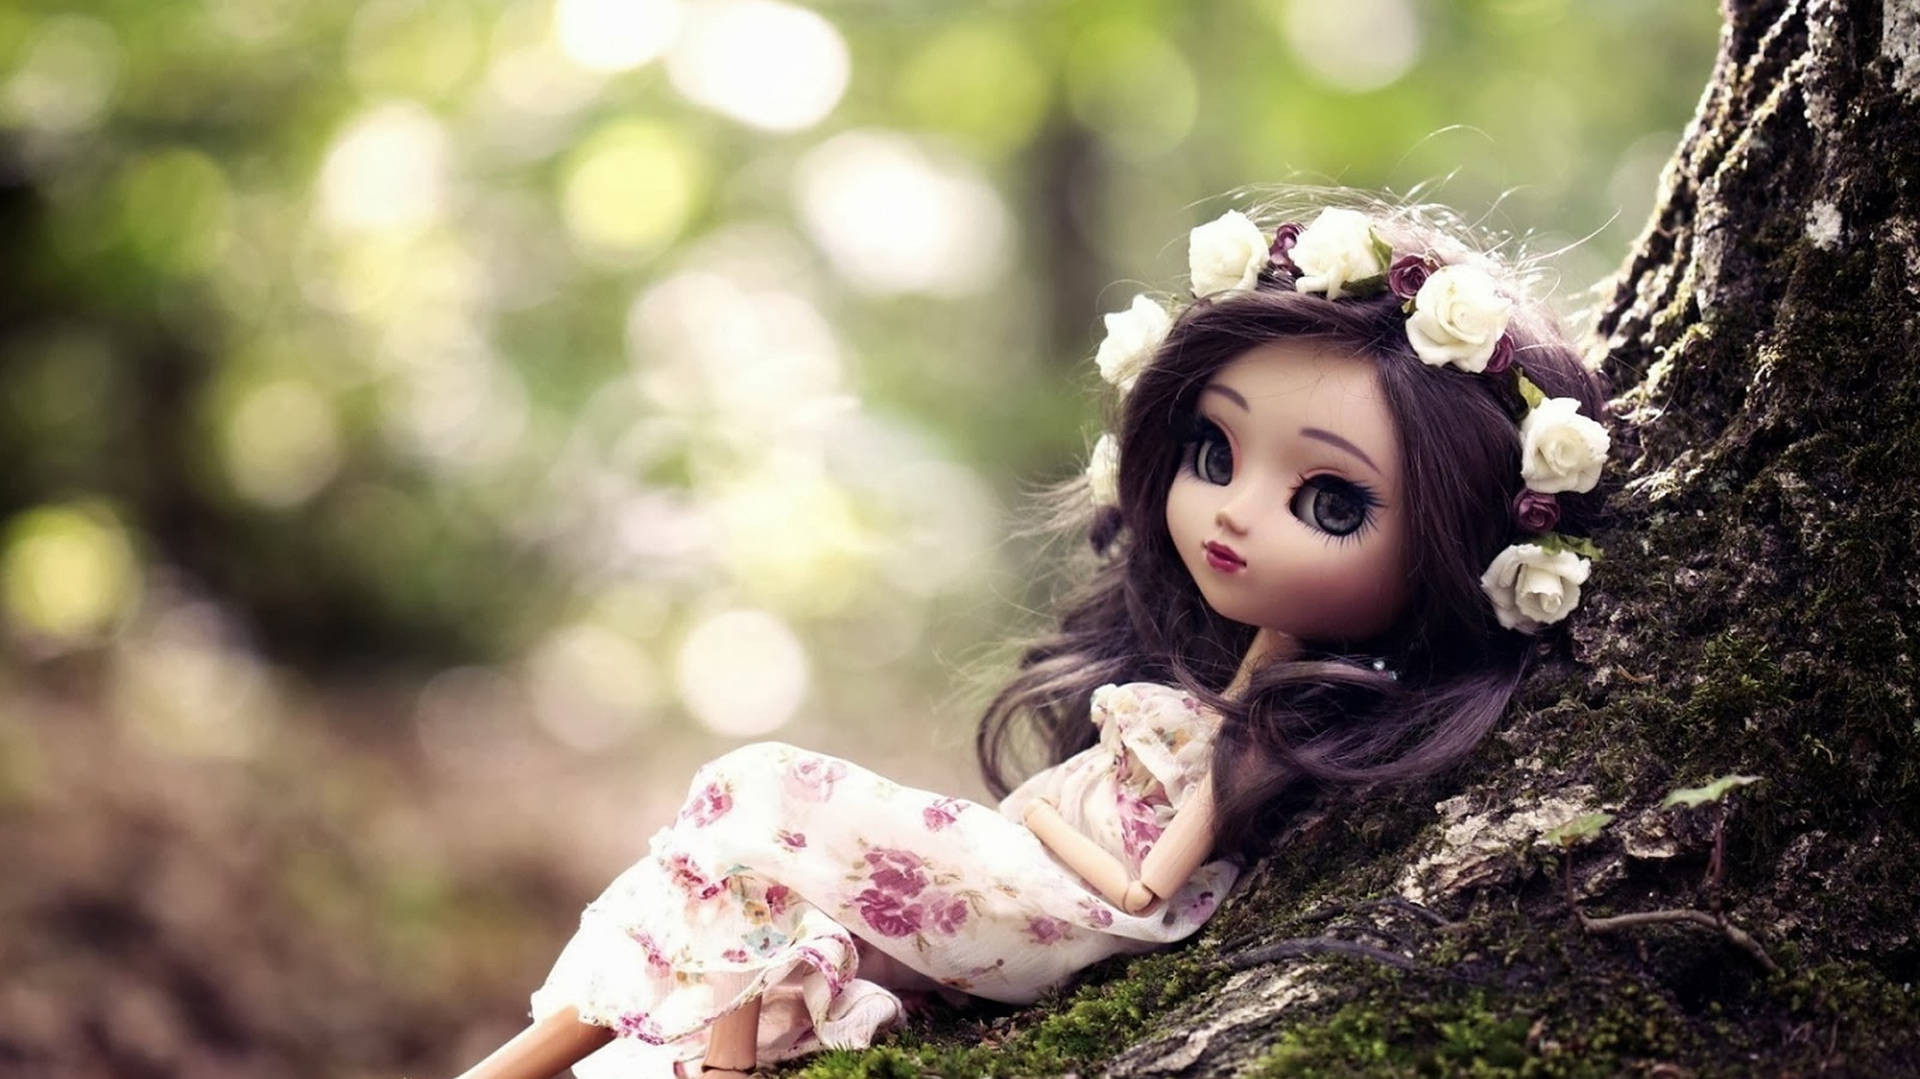 Free Doll Wallpaper Downloads, [200+] Doll Wallpapers for FREE | Wallpapers .com